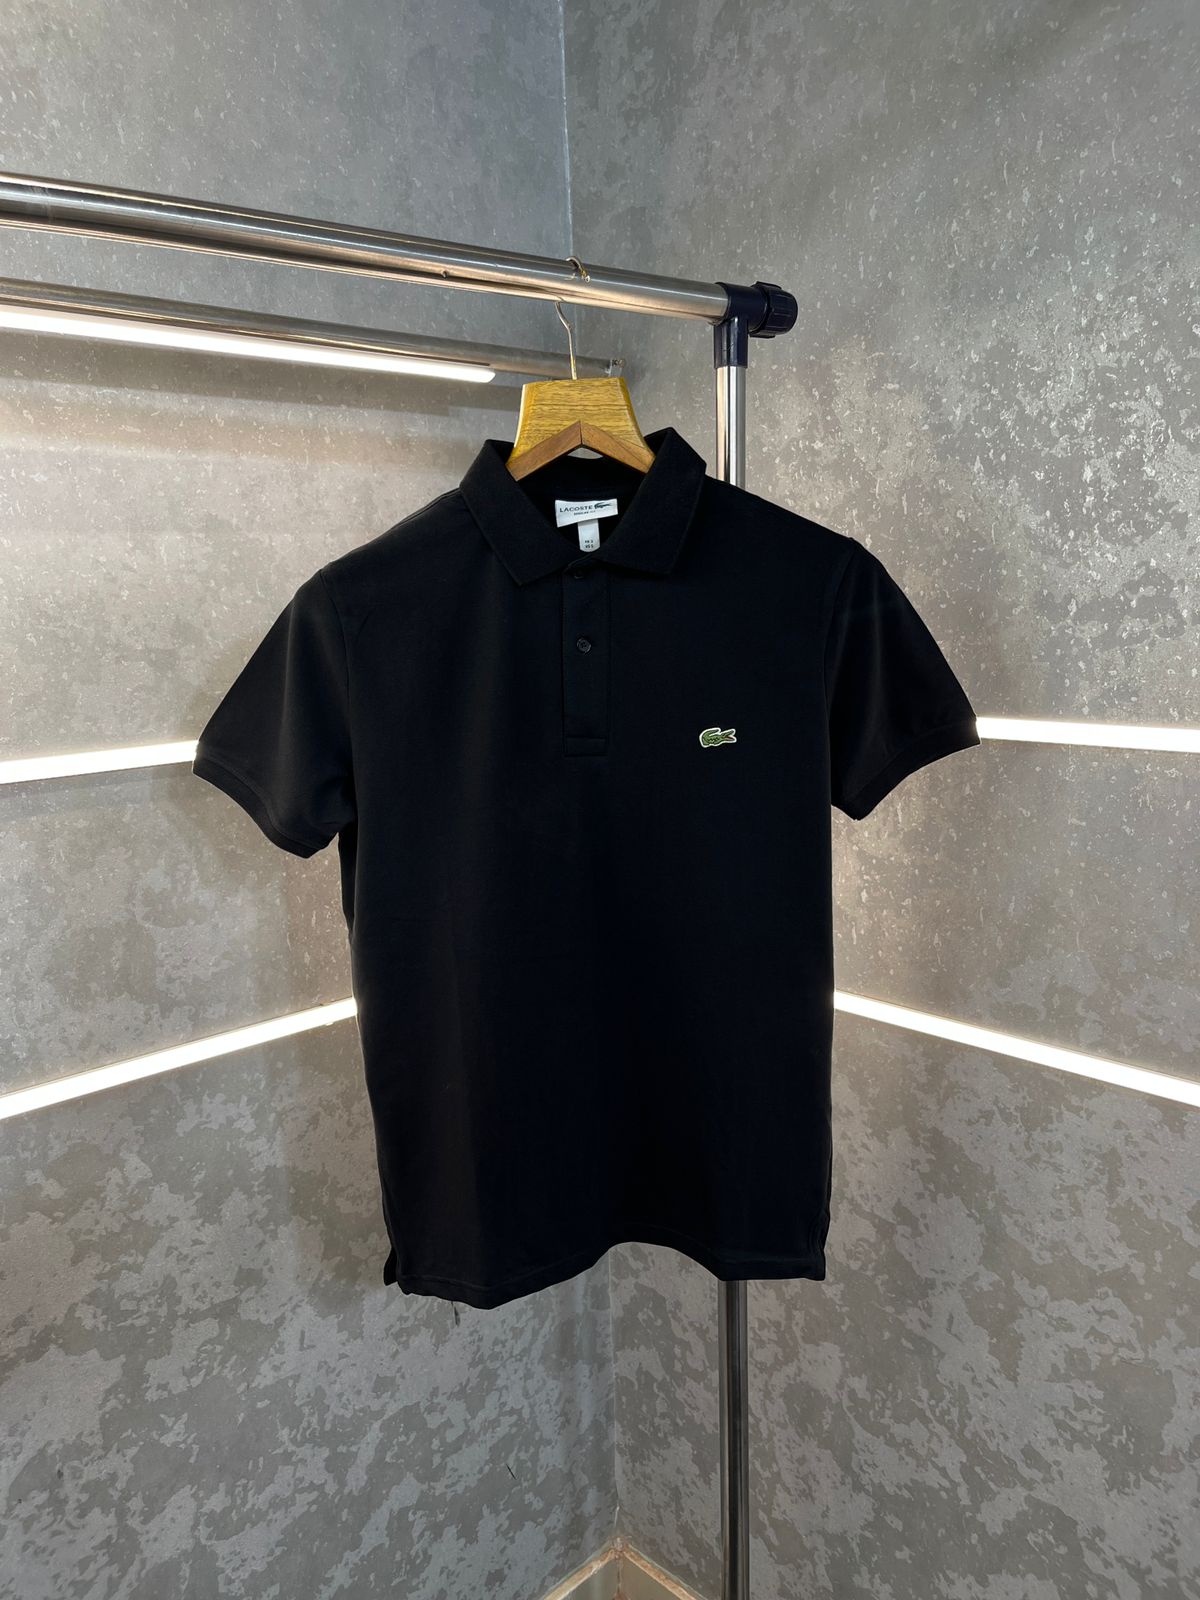 Details View - Lacoste T-Shirt photos - reseller,reseller marketplace,advetising your products,reseller bazzar,resellerbazzar.in,india's classified site,Lacoste T-Shirt | lacoste t shirt men | lacoste t shirt price | lacoste t shirt in surat | lacoste t shirt in rajkot